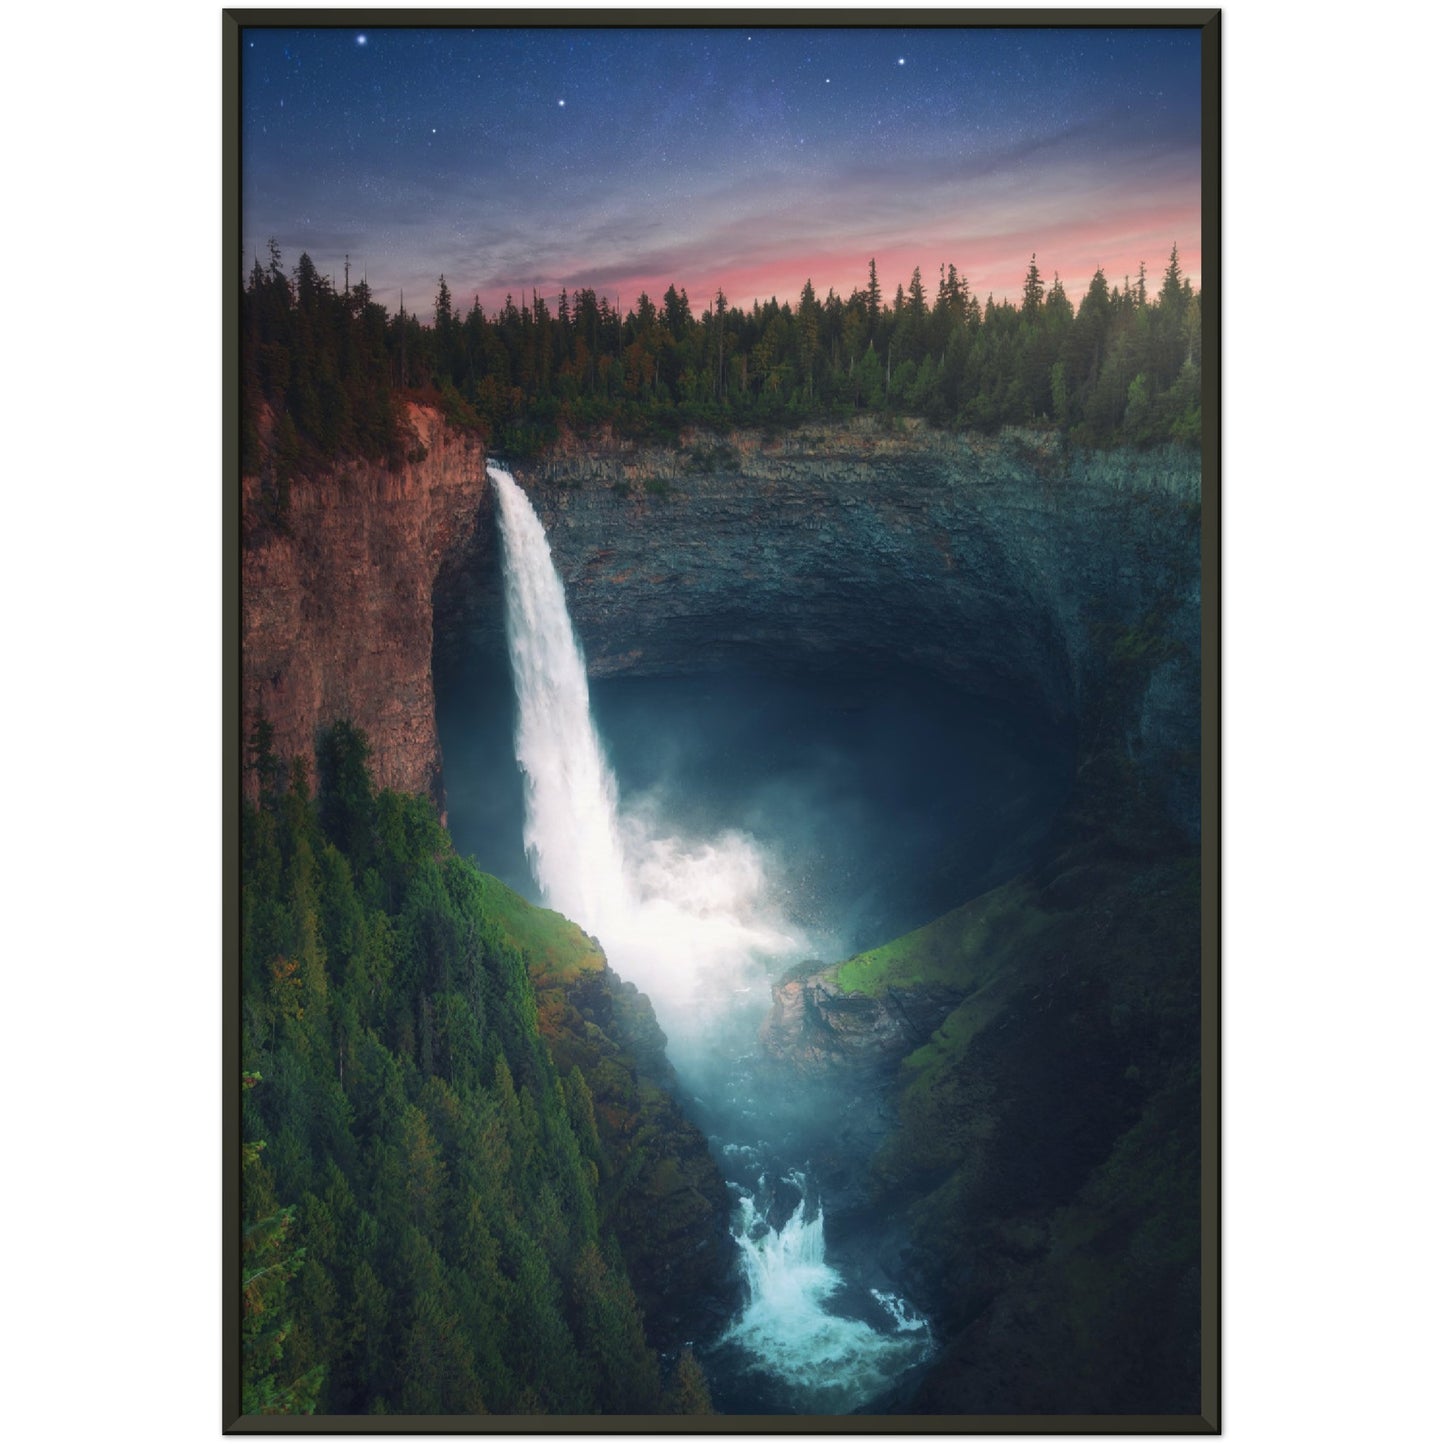 Galactic Waterfall - Museum-Quality Matte Paper Metal Framed Poster